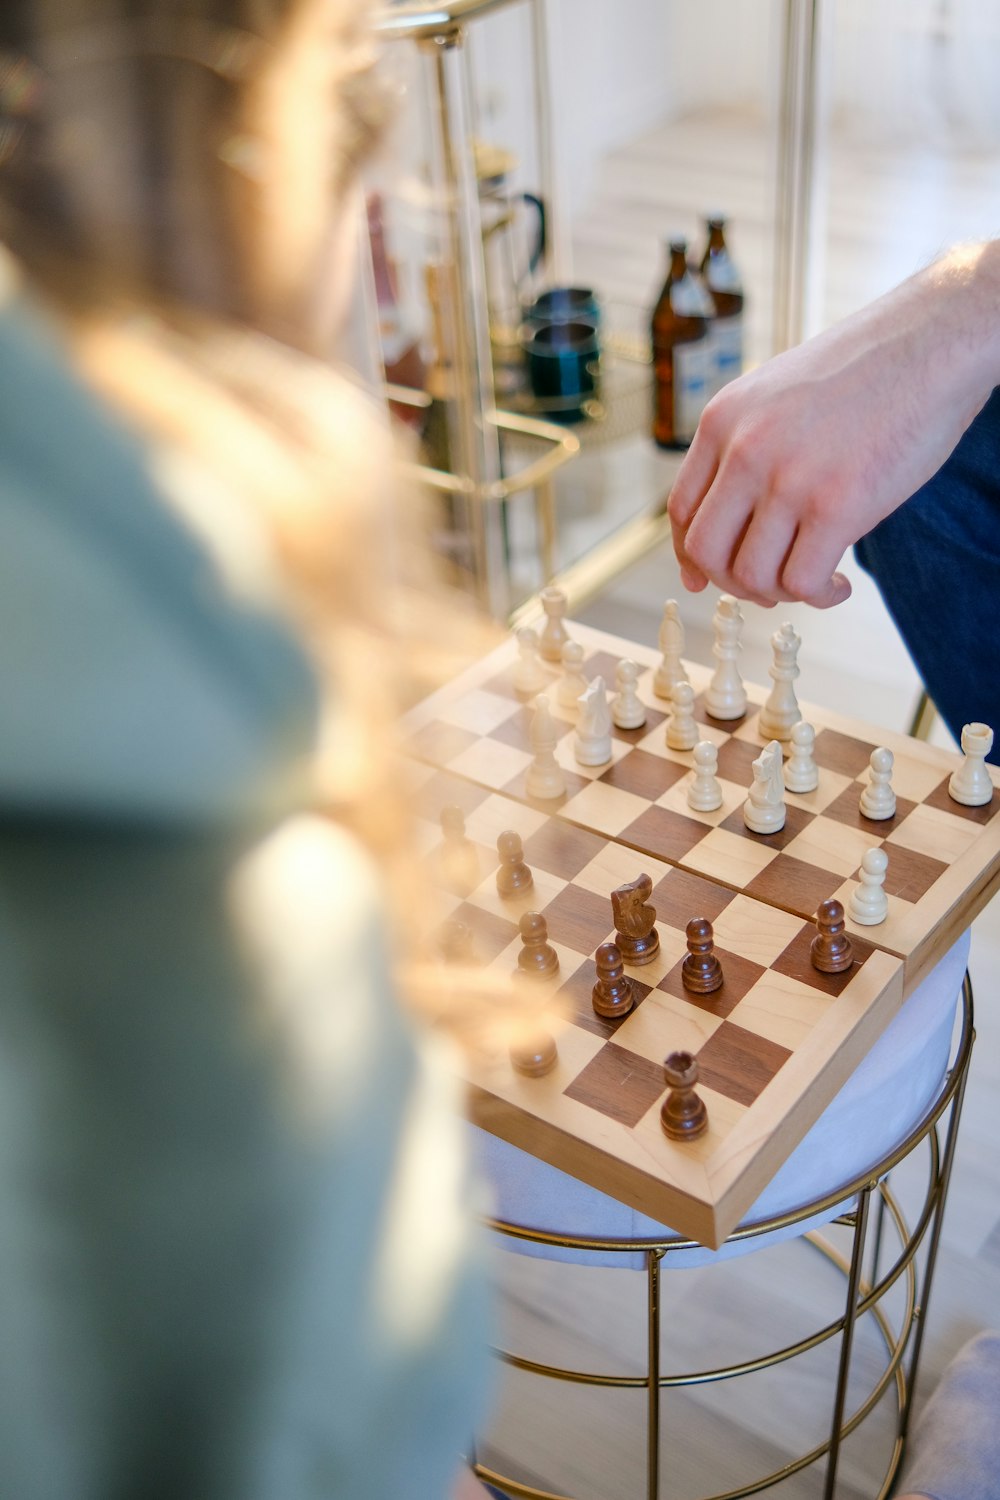 a person playing a game of chess on a table